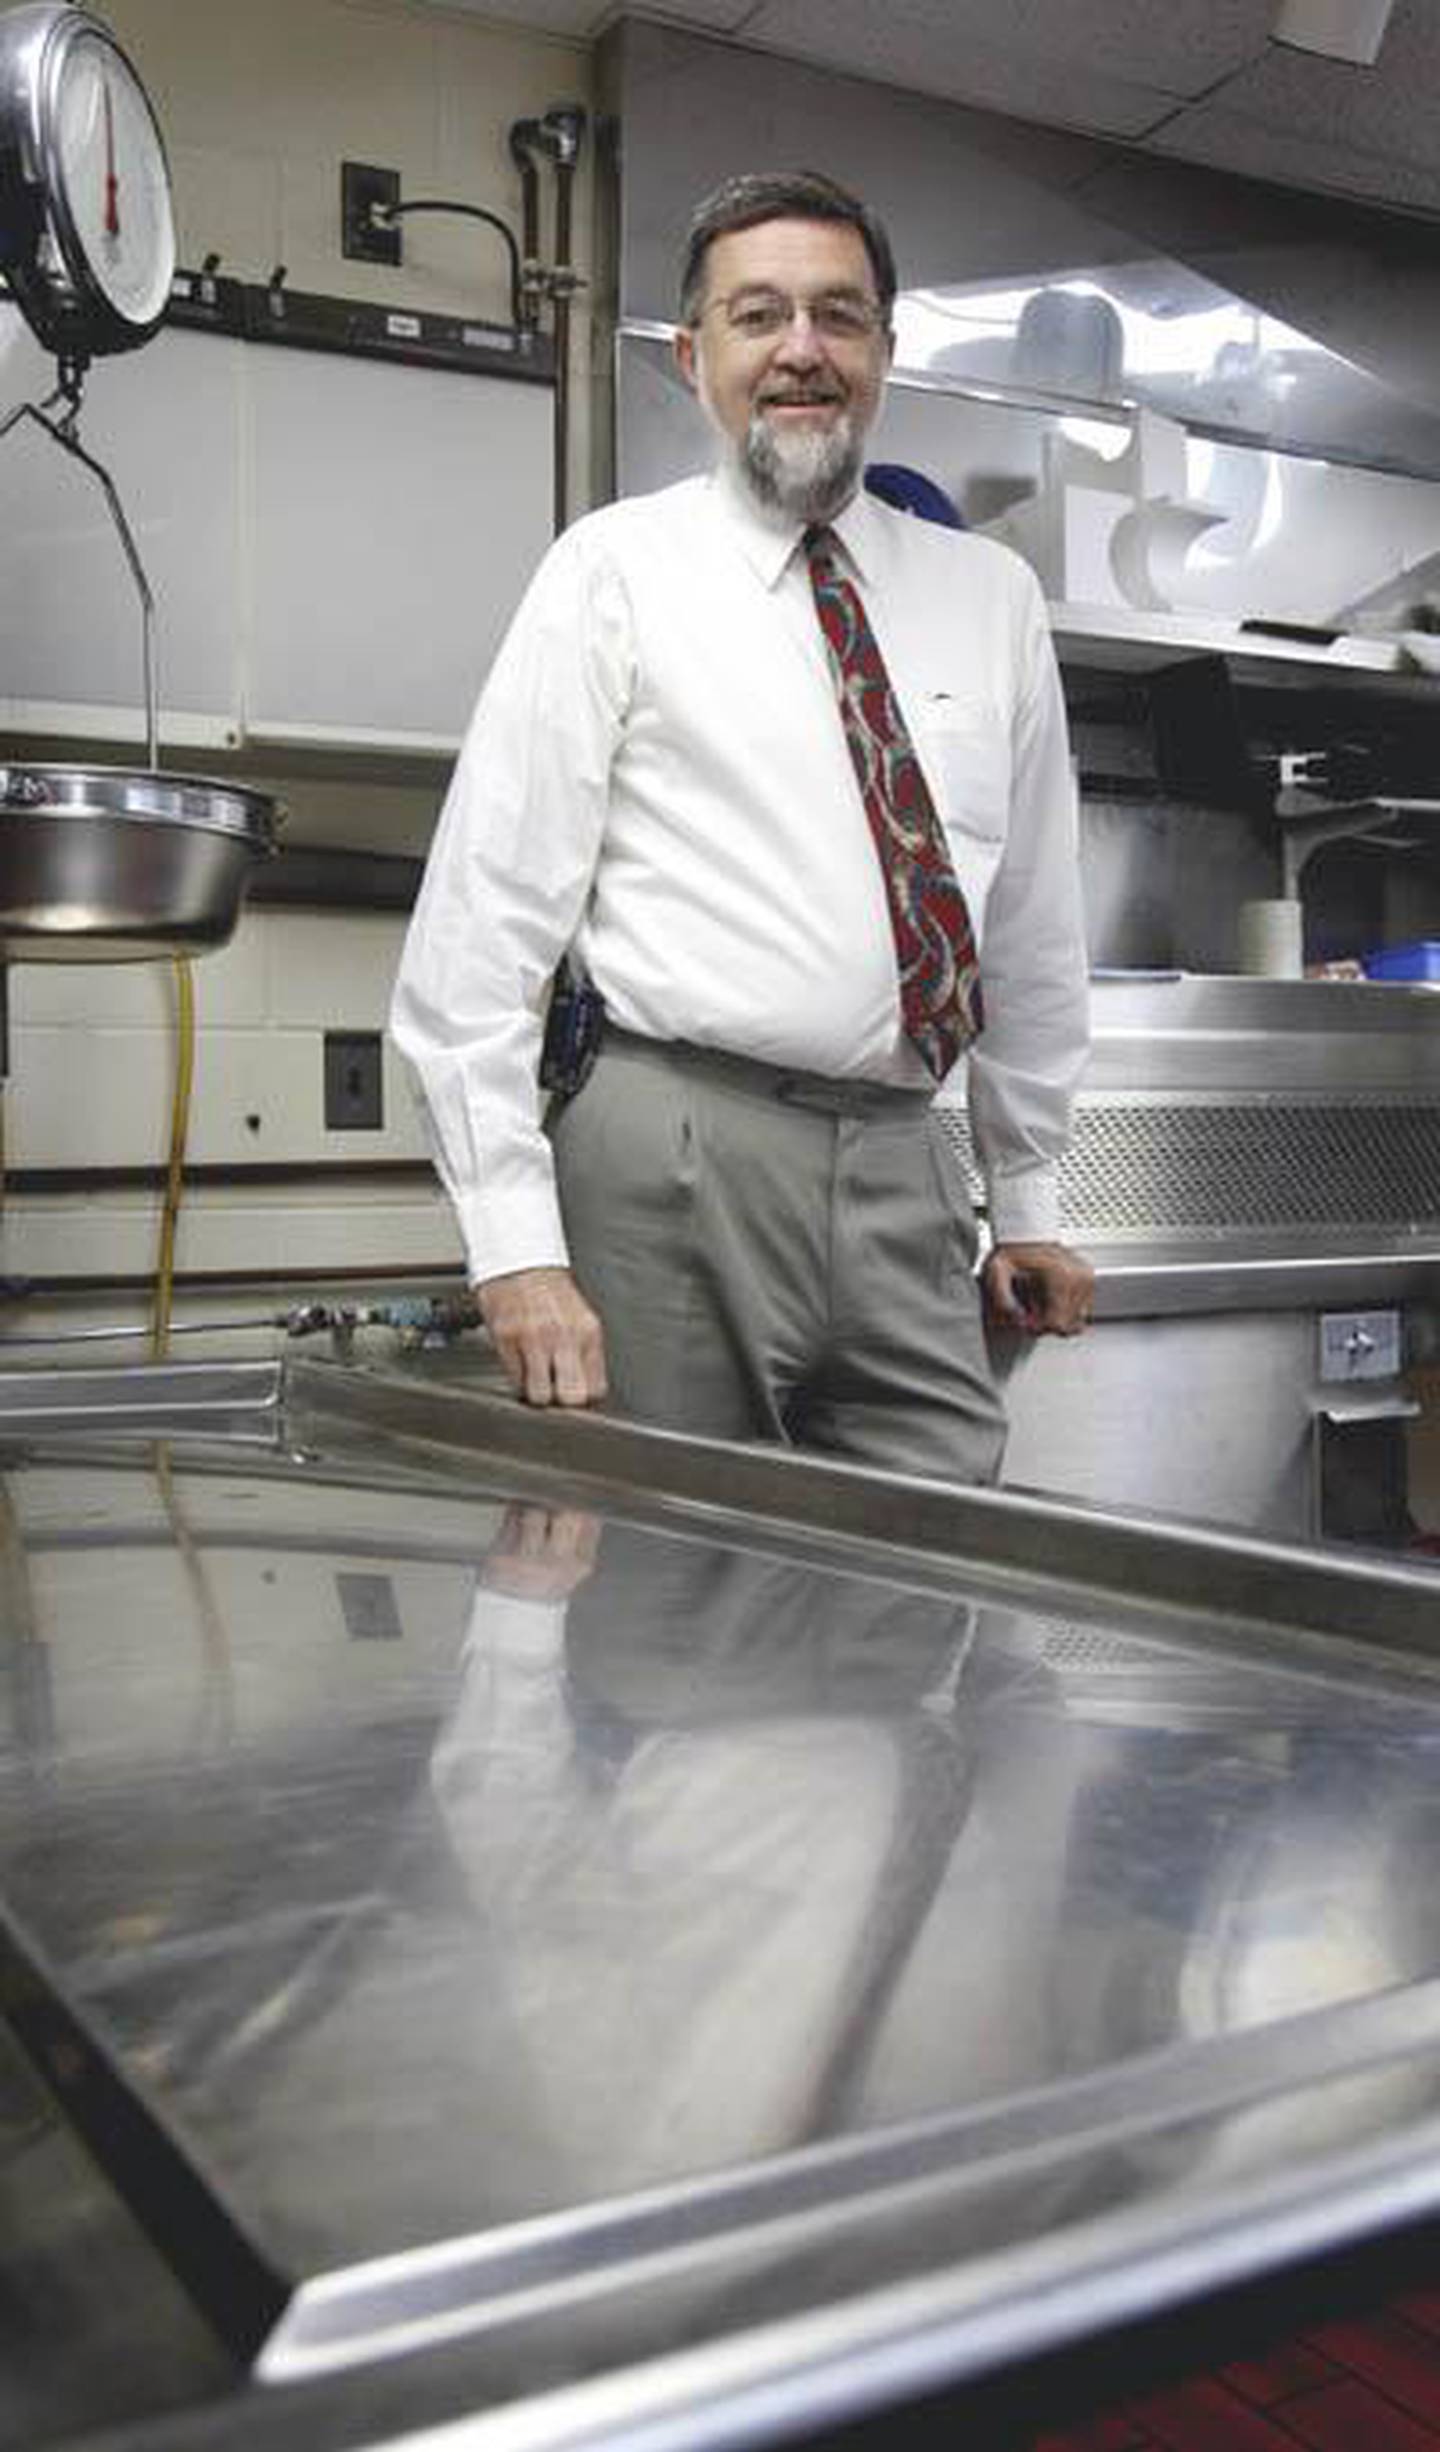 Dennis Miller stands in the county morgue in this Shaw Local file photo from March 22, 2012. Miller is the DeKalb County coroner and director of the county’s Emergency Services and Disaster Agency.